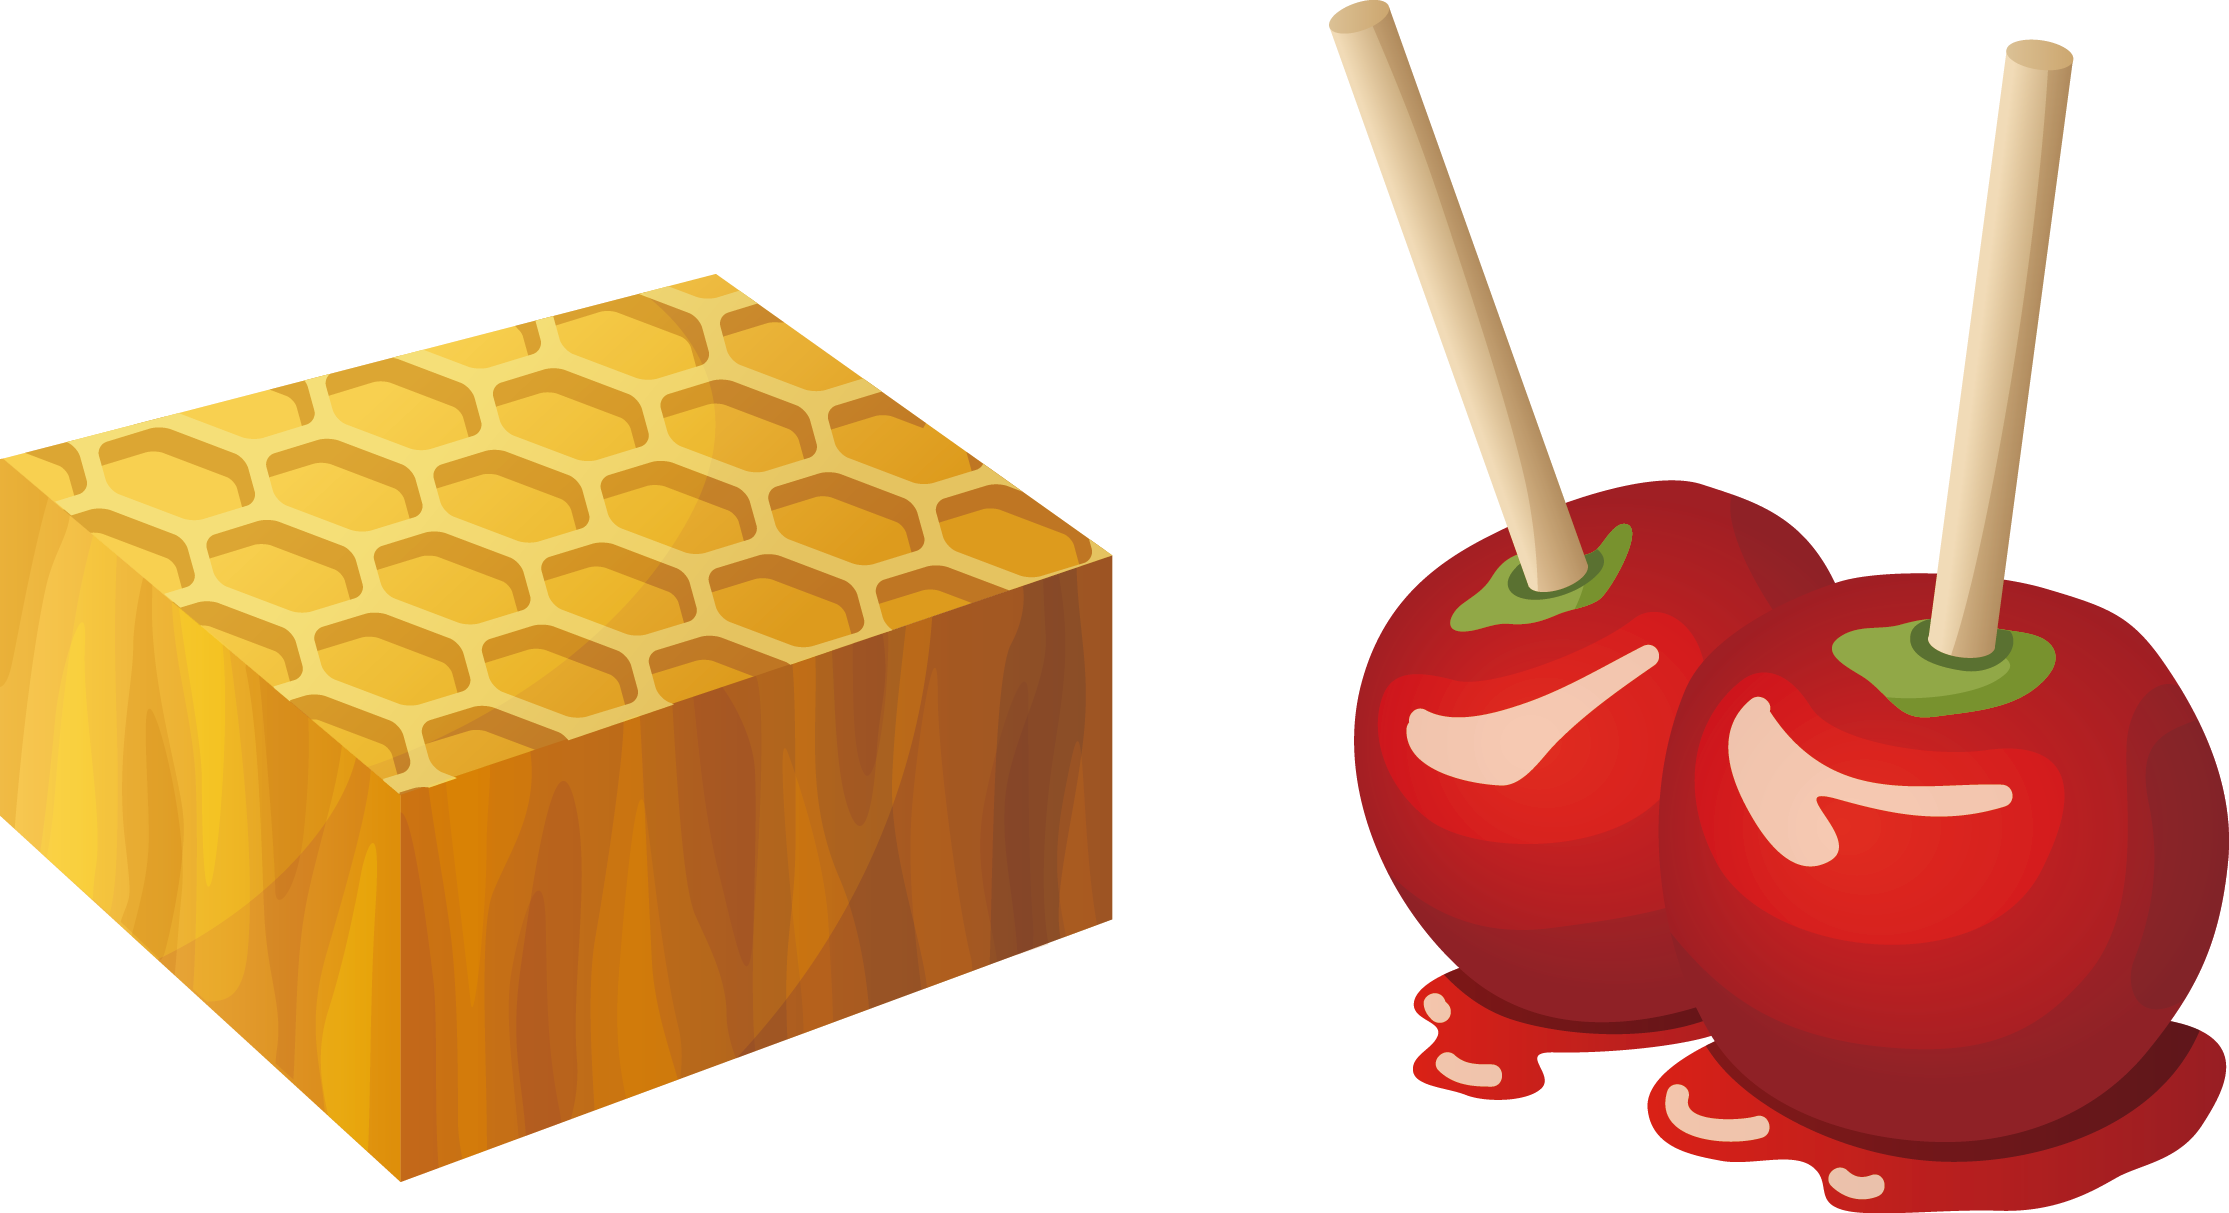 Candy apple caramel fruit. Fruits clipart cheese